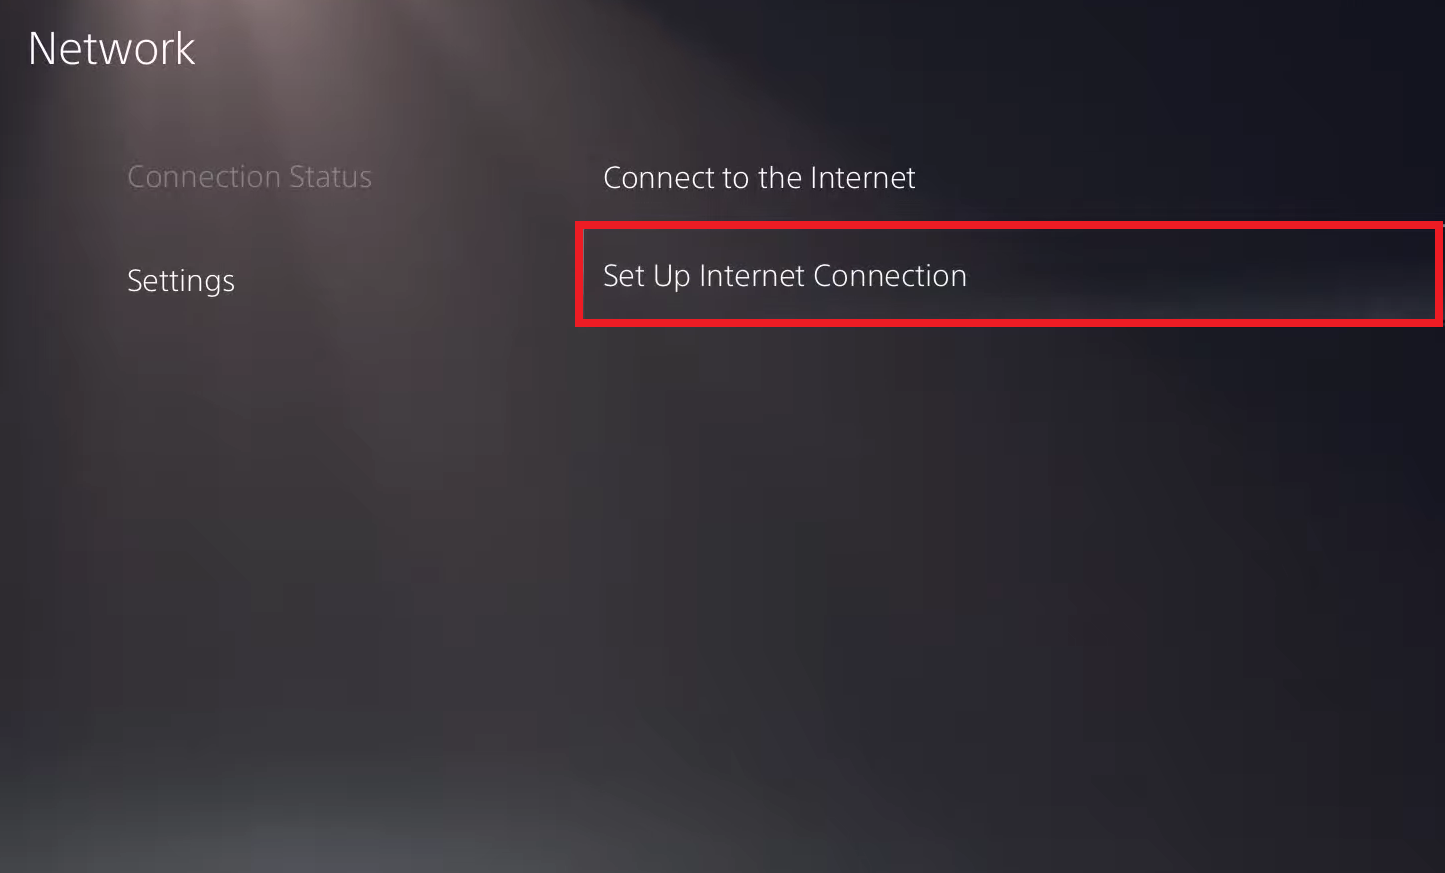 select the Set Up Internet Connection option